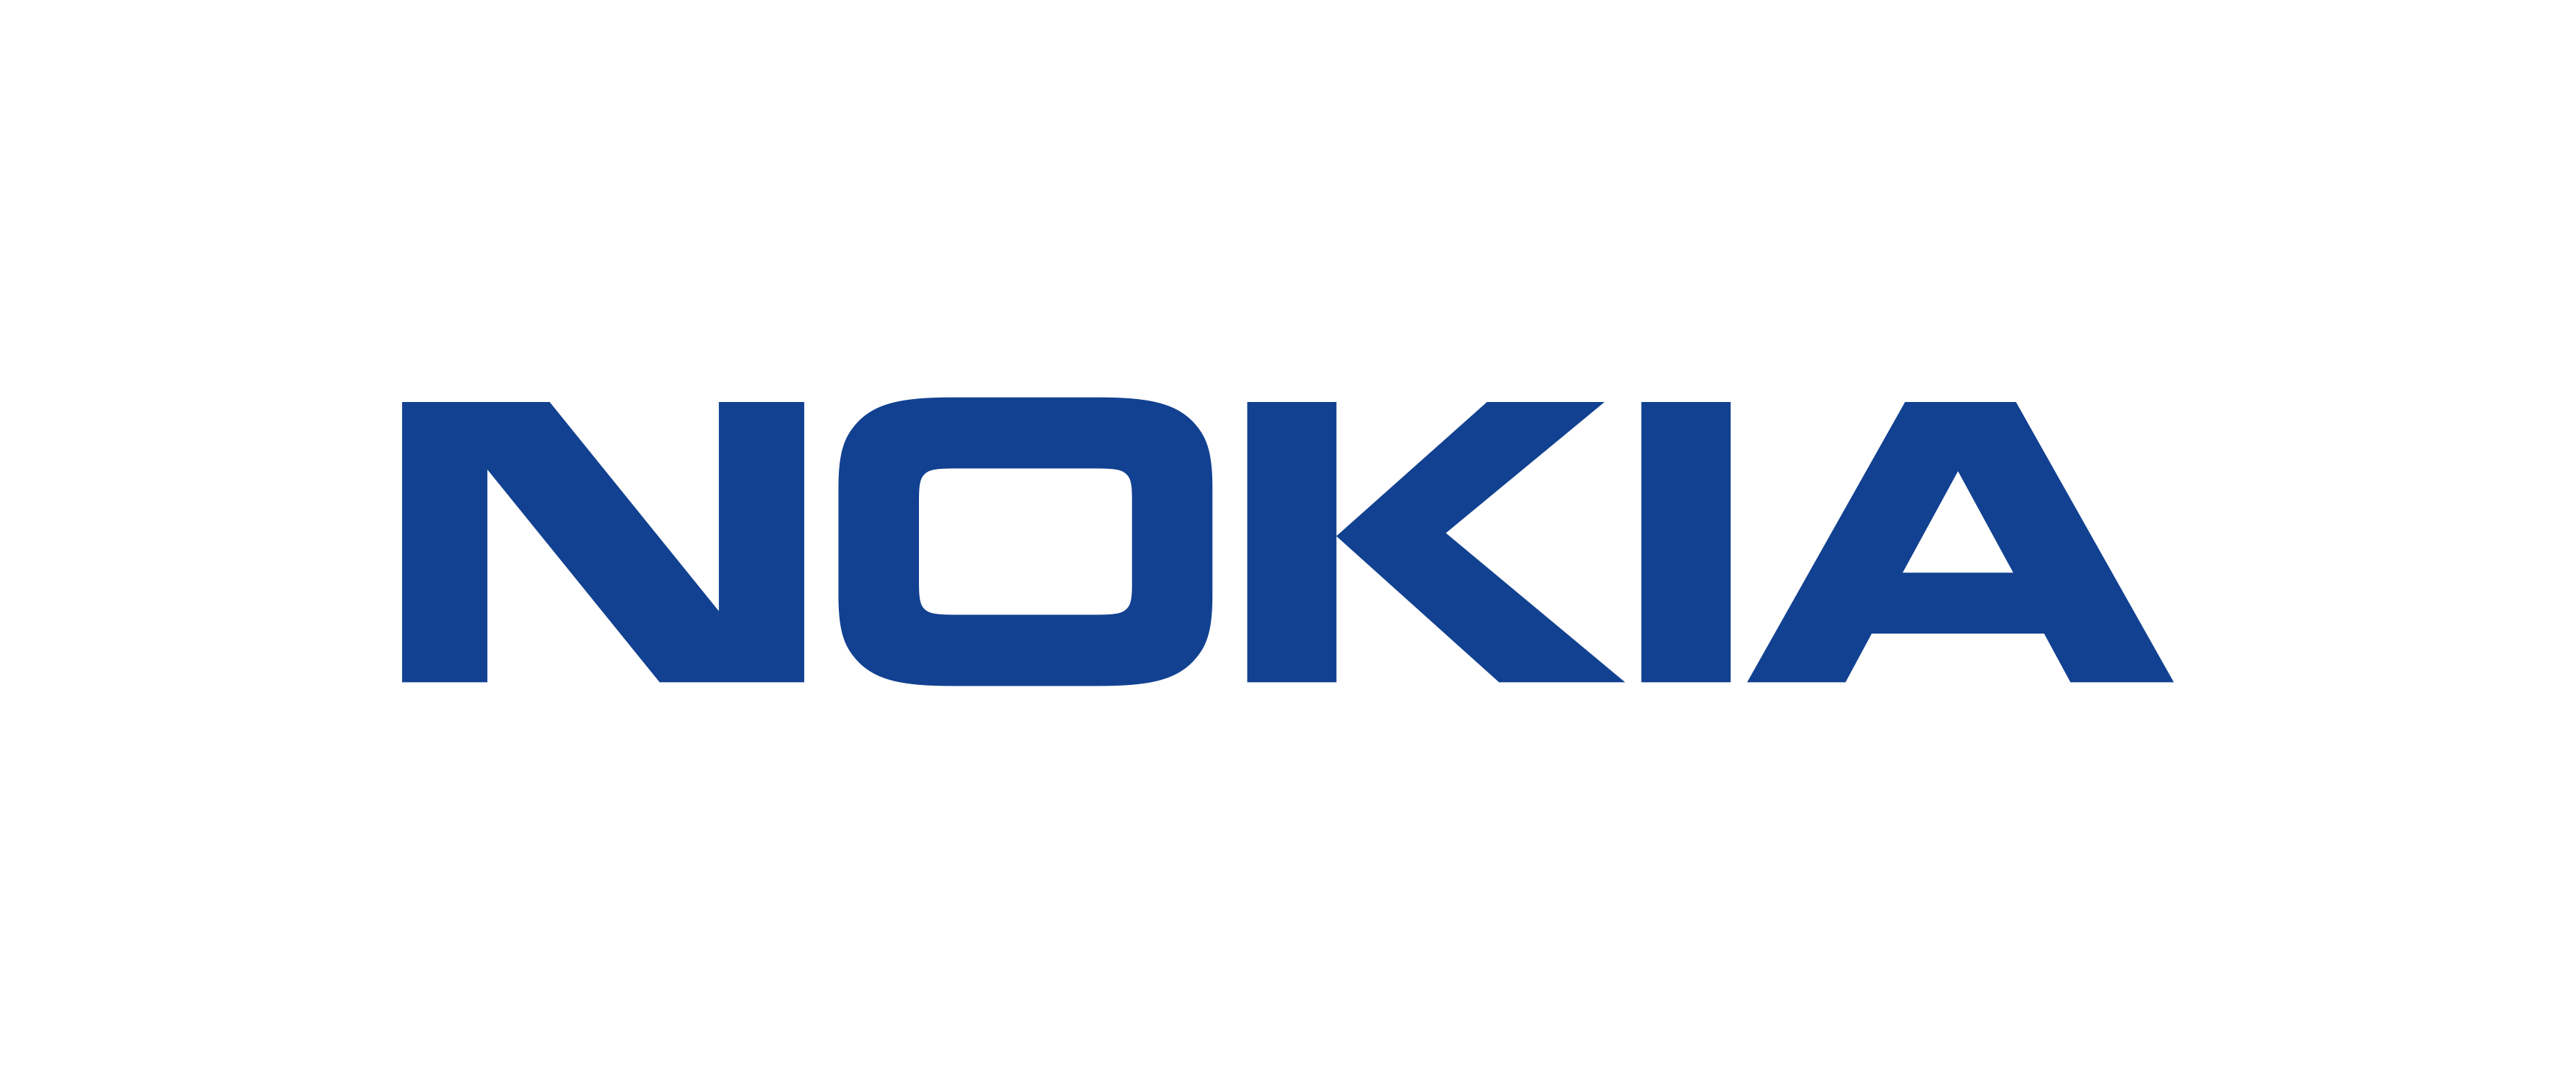 More information about "Nokia Athens is Hiring"